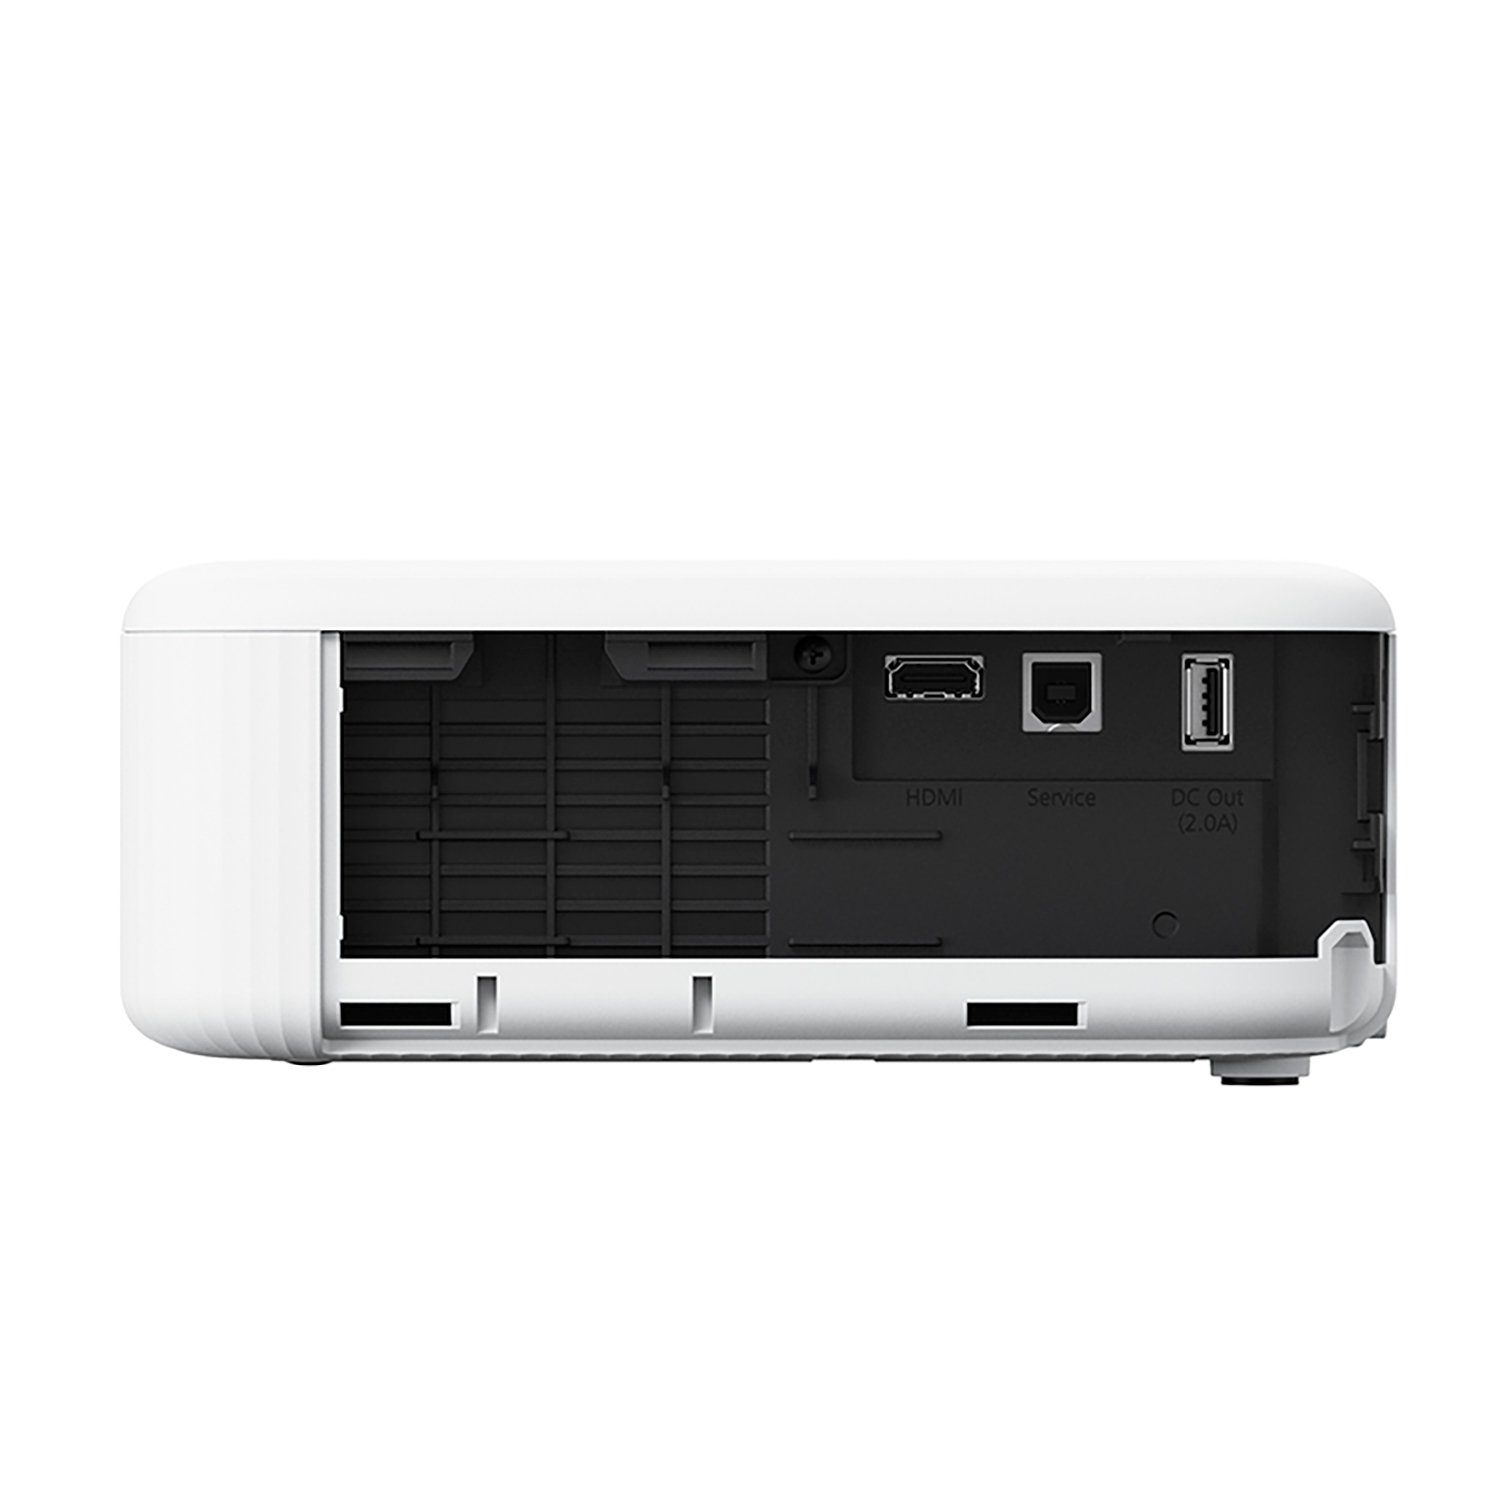 :1, Beamer Epson lm, CO-FH02 1920 1080 px) (3000 x